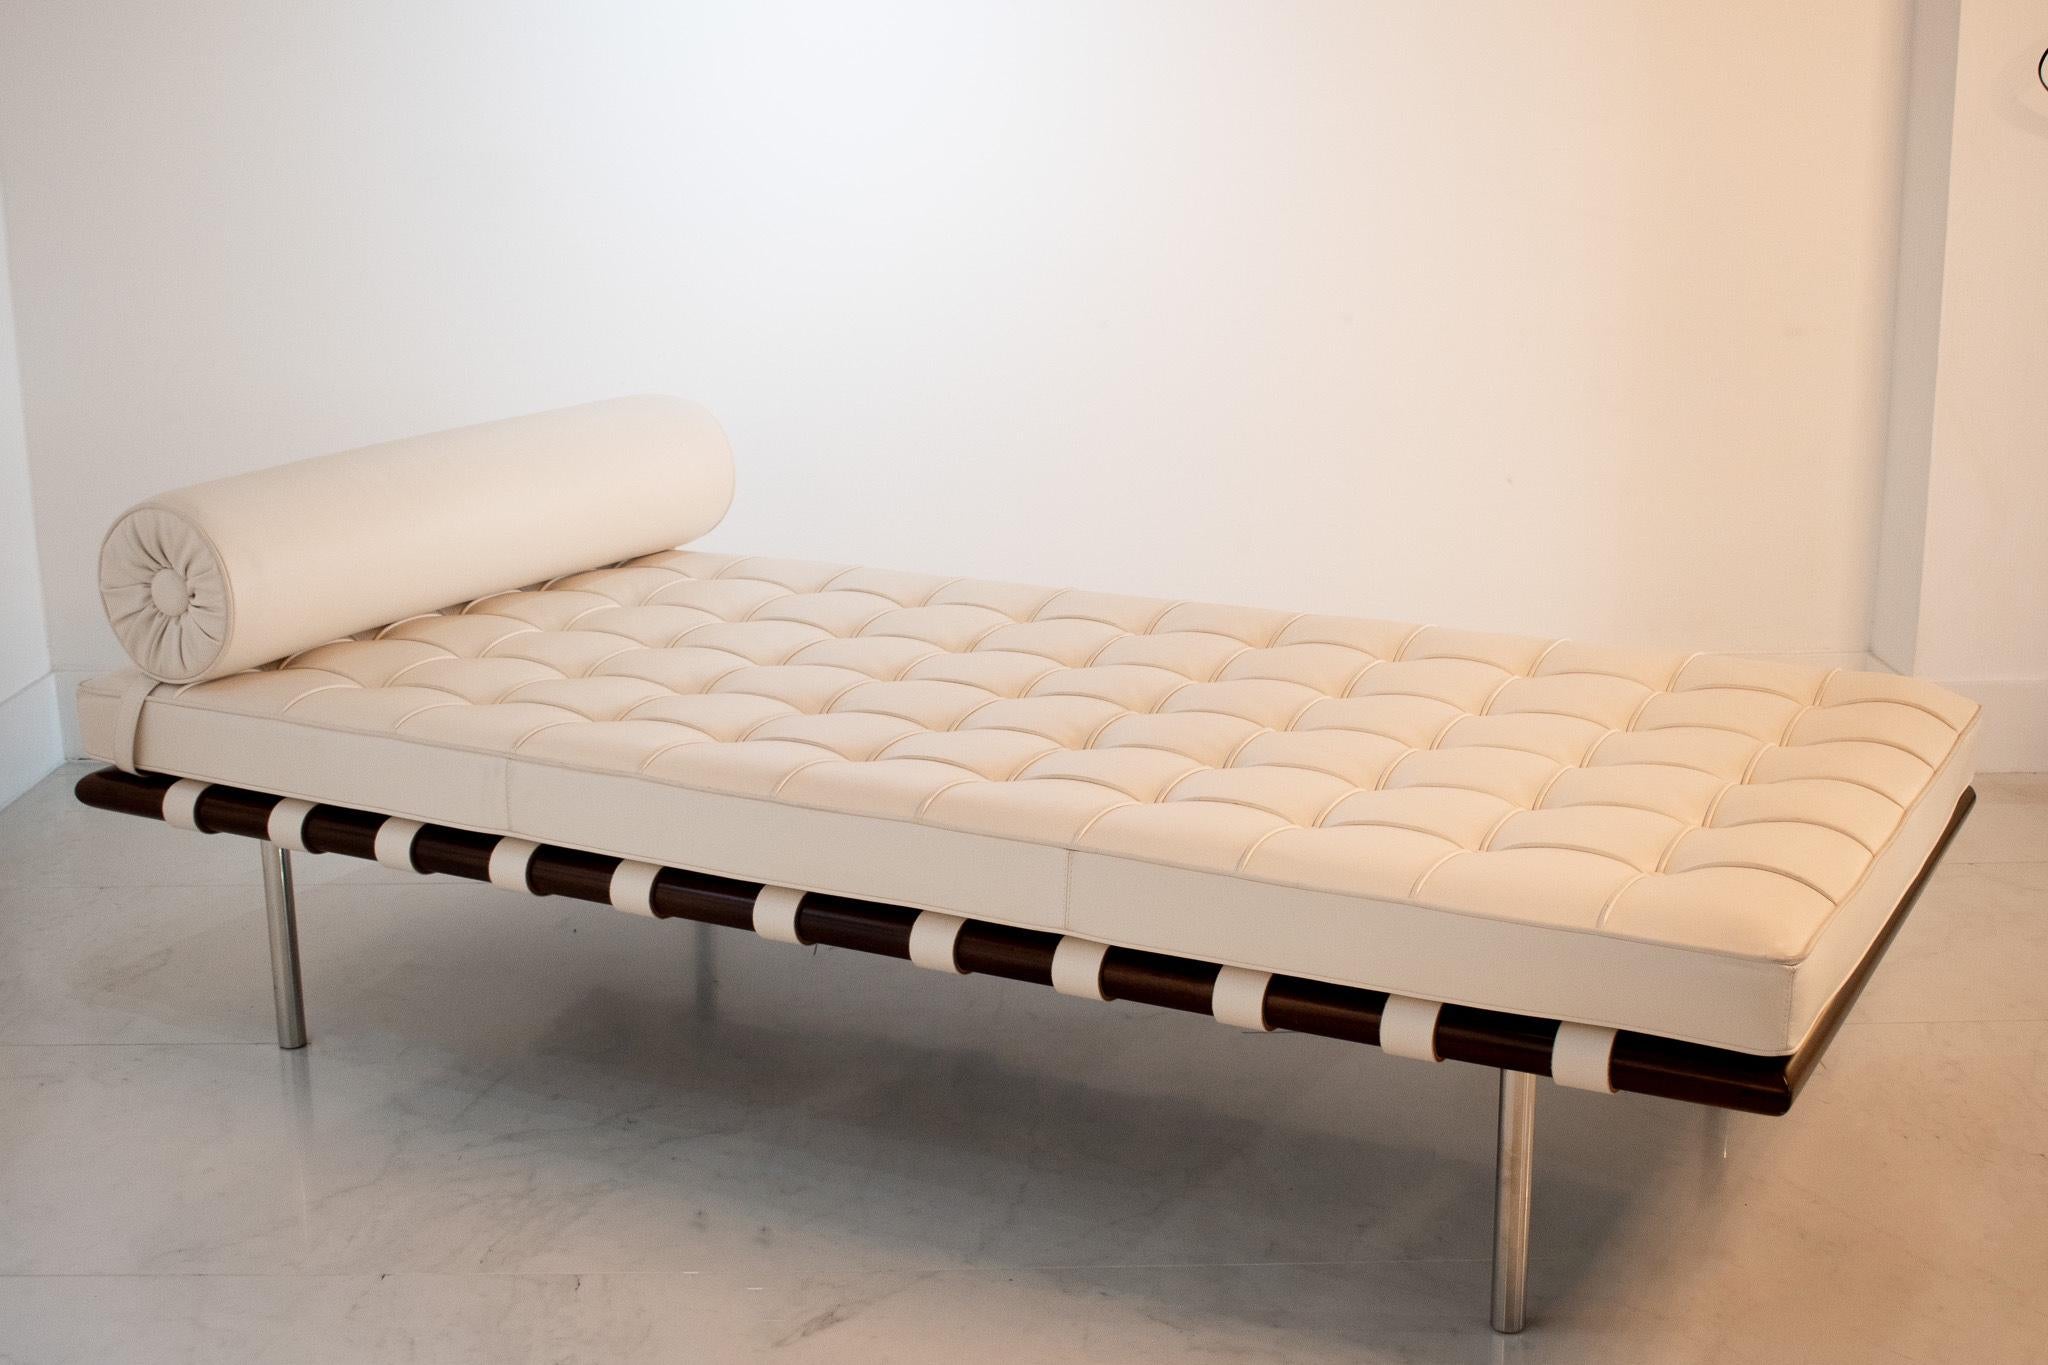 Italian Barcelona Day Bed by Mies van der Rohe for Knoll Studio Cream Leather